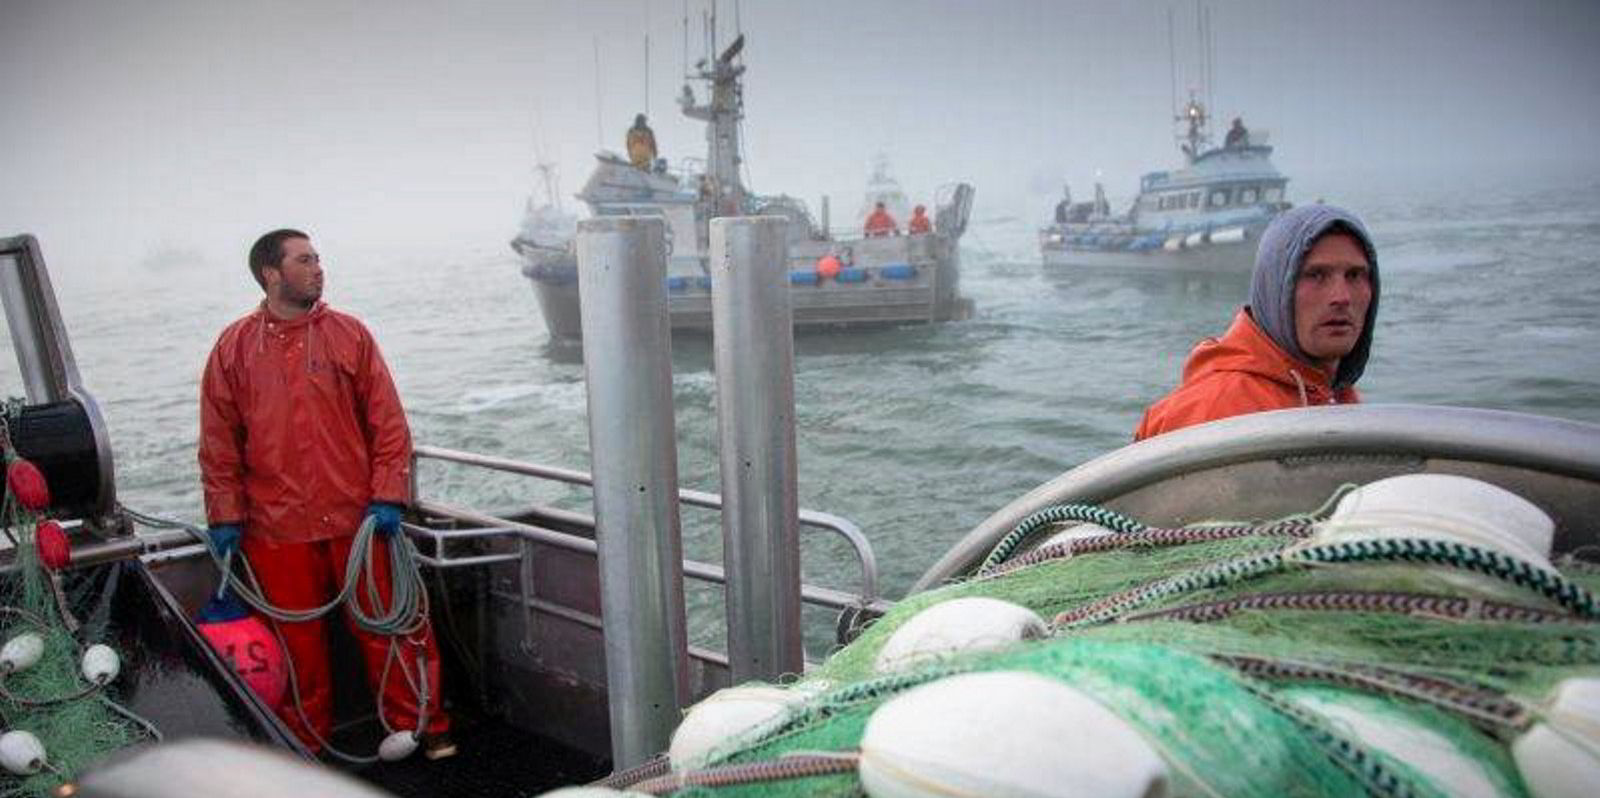 Bristol Bay salmon fishermen planning to anchor boats in the